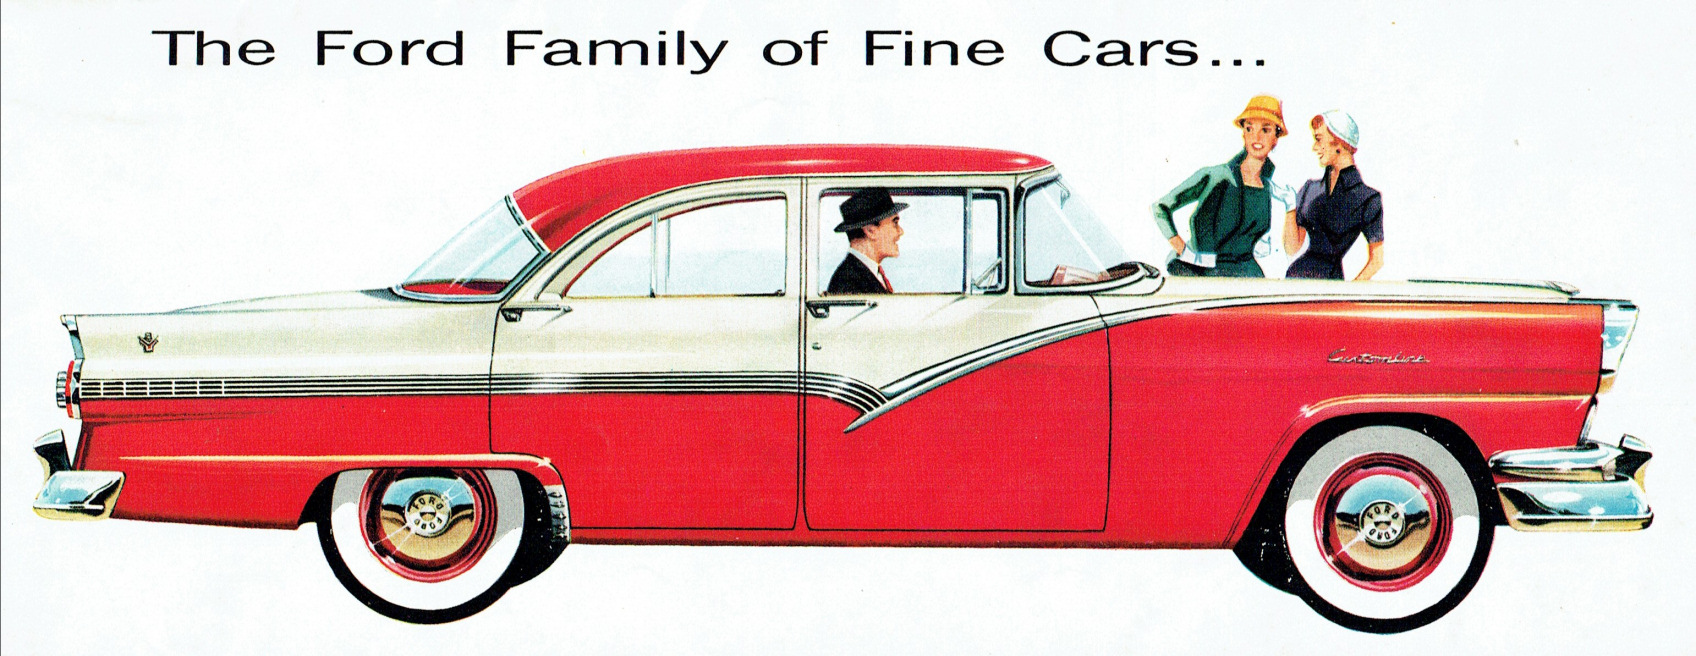 1957_Ford_Family_Aus-01